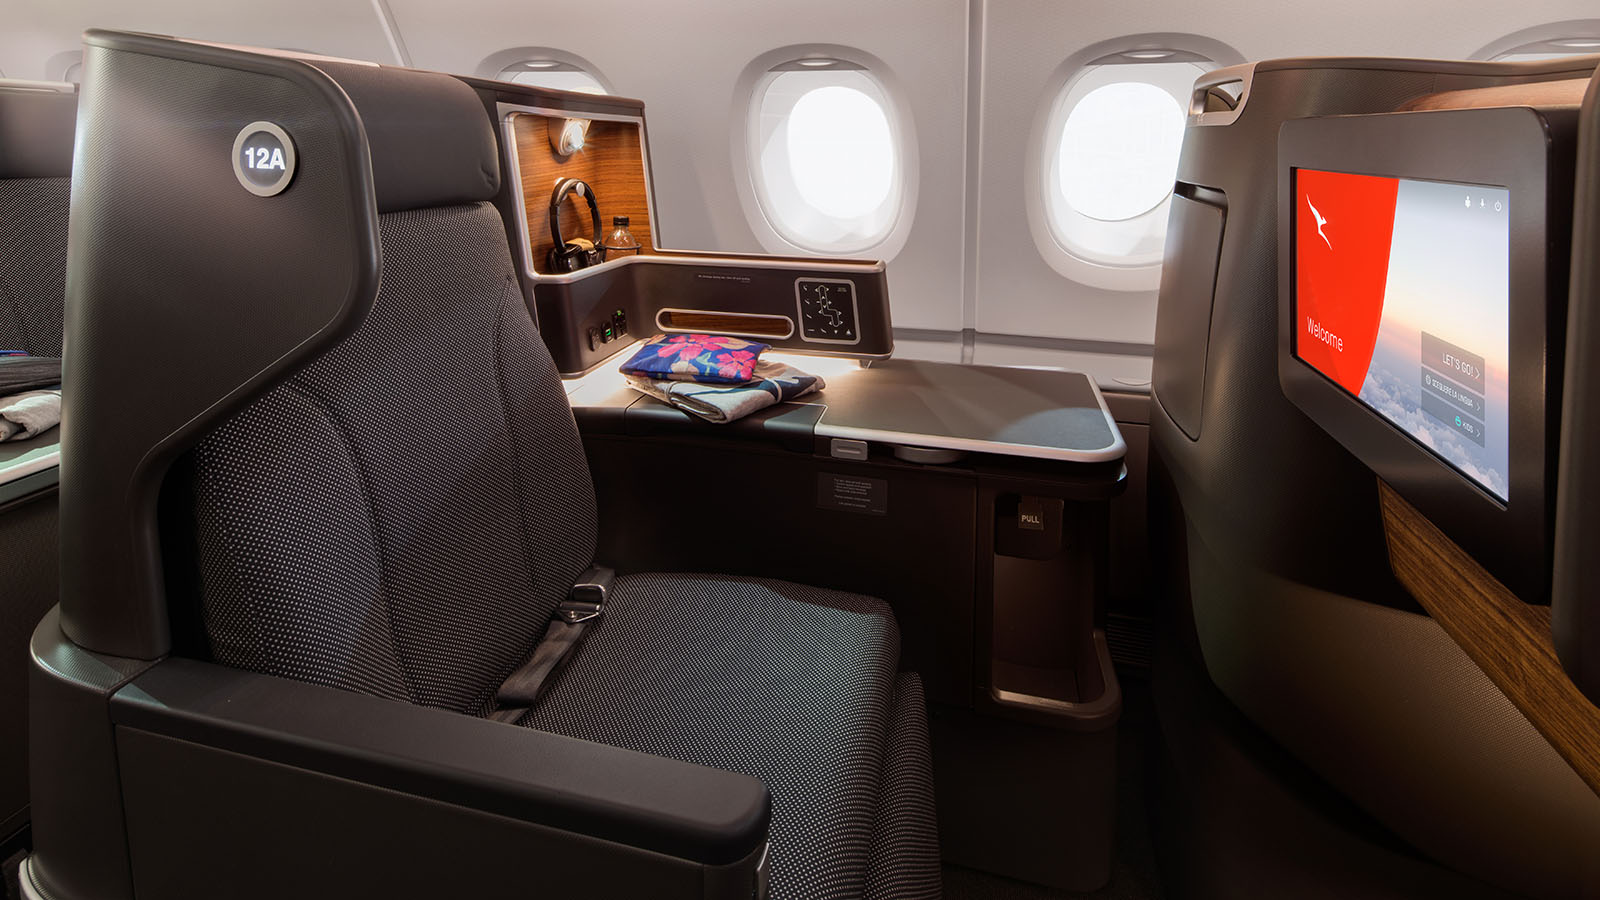 Spend points on Business Class from the ANZ Qantas Business Rewards card